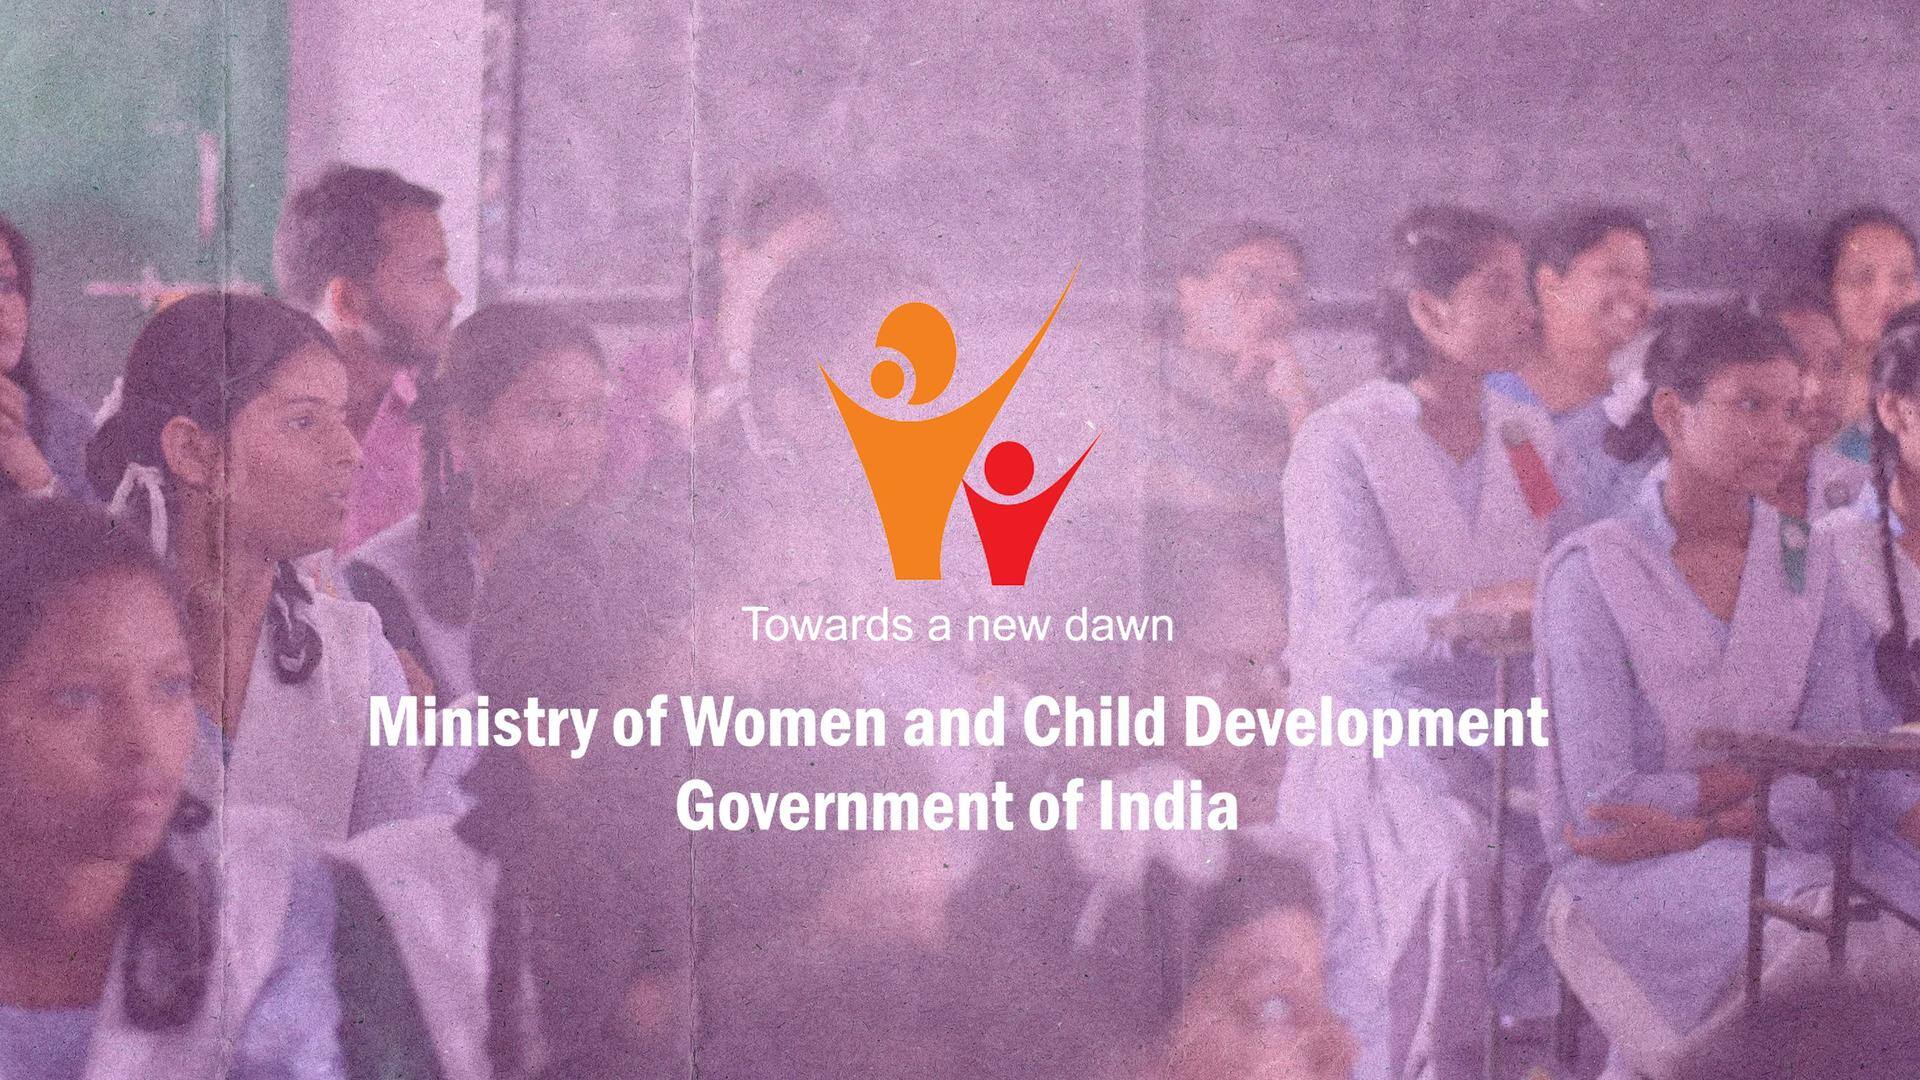 24L ghost beneficiaries: Scheme for girl dropouts stopped in 2022